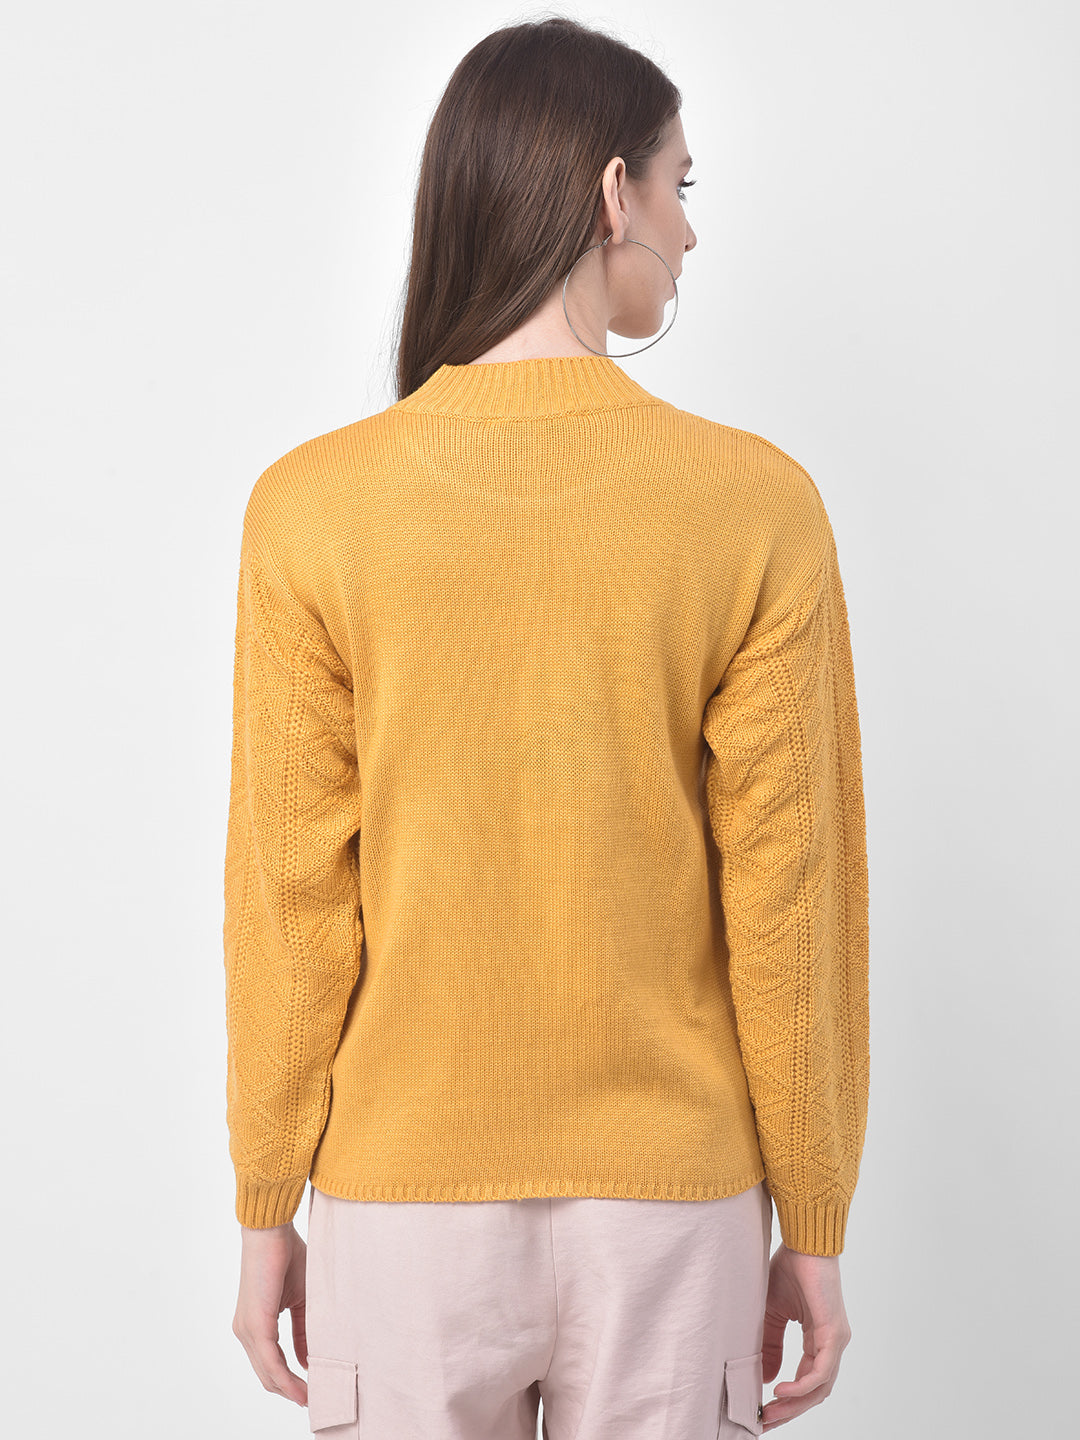 Sweater With Sleeve Cable Design